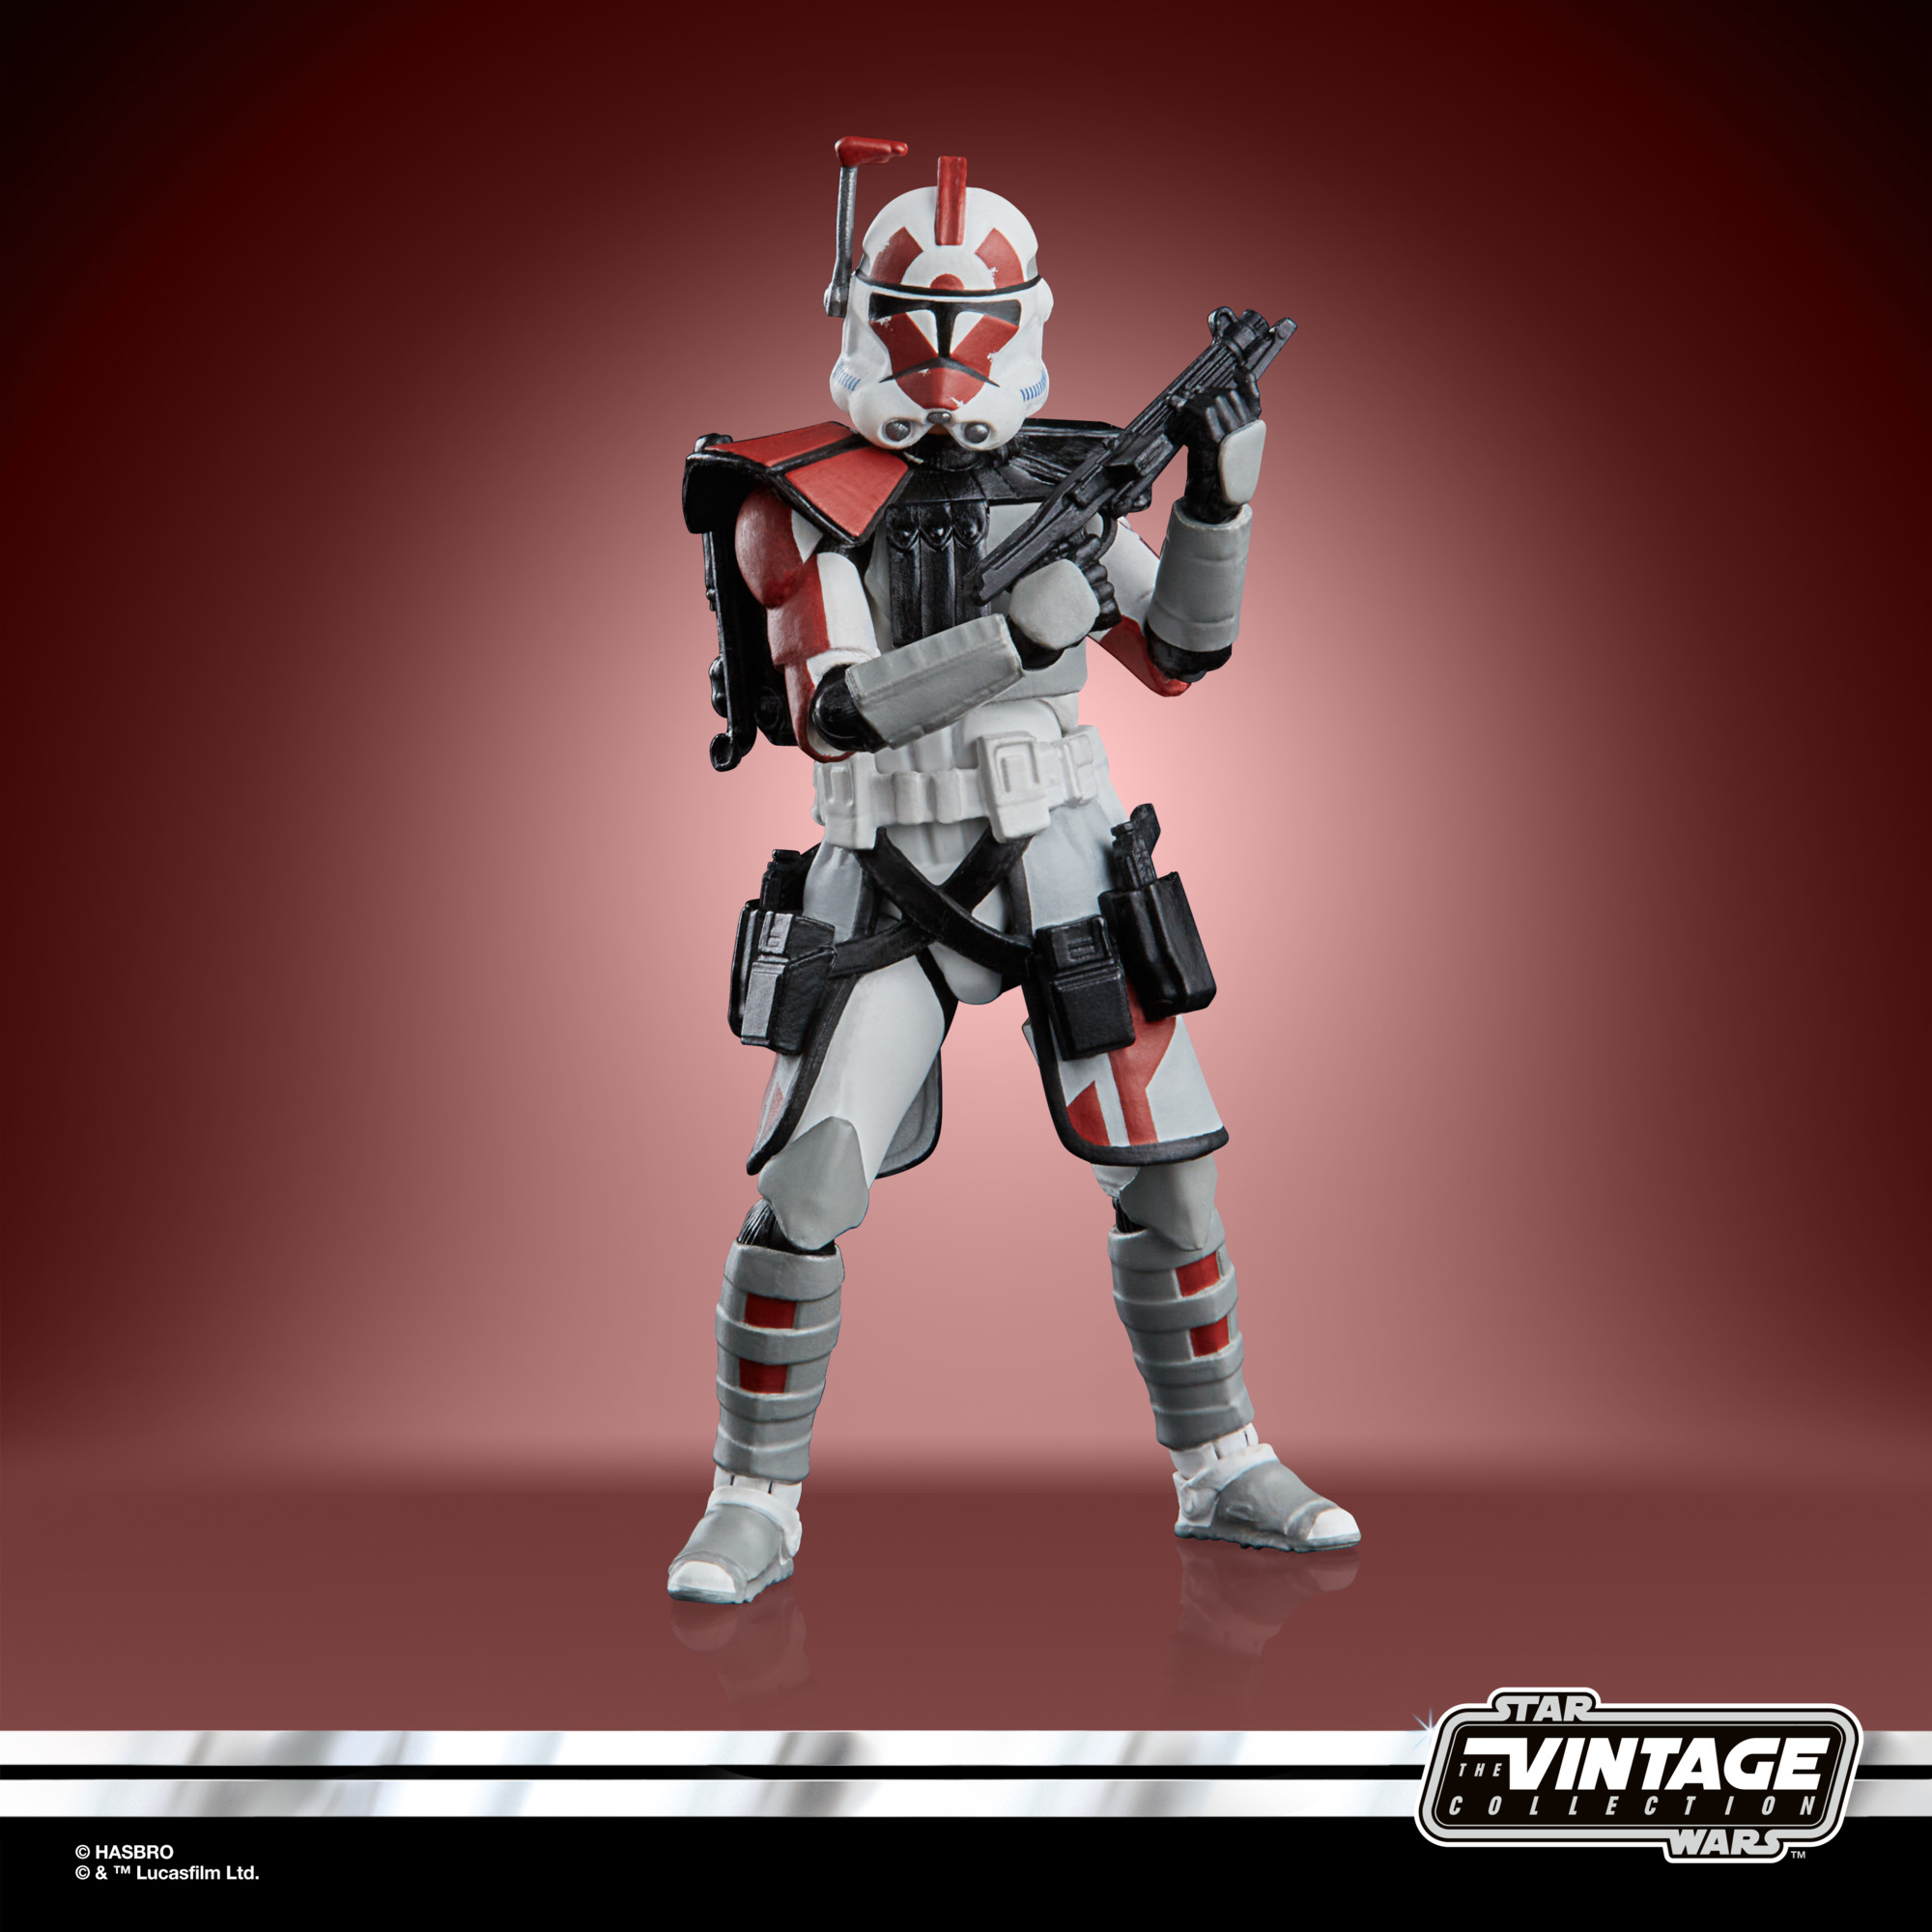 Star Wars The Vintage Collection Gaming Greats ARC Trooper (Star Wars Battlefront II) F62525L0 5010994151744